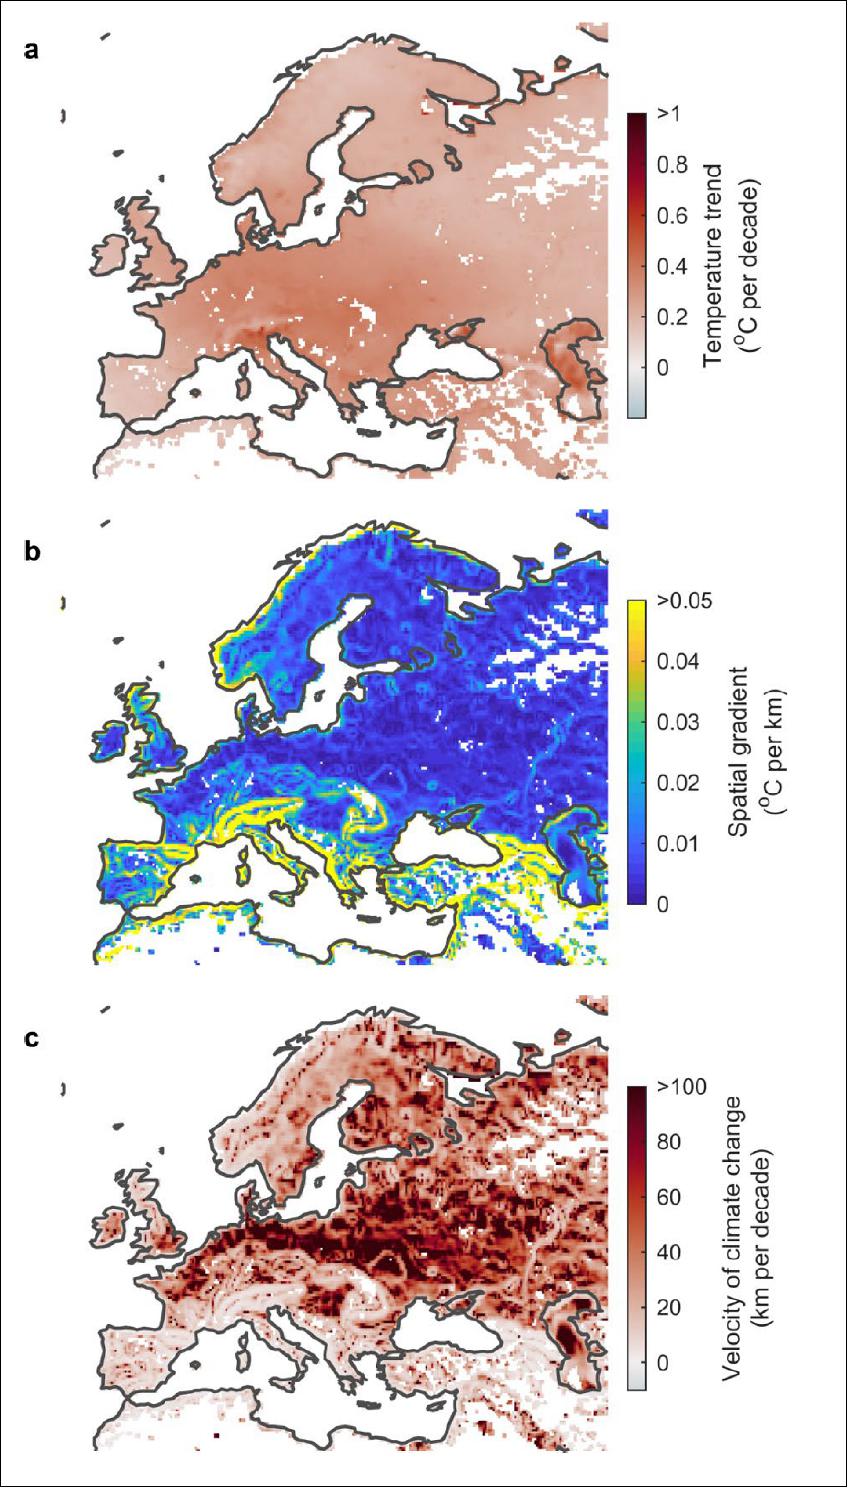 Figure 66: The velocity of climate change in European standing waters. Figure a depicts the surface water temperature trend, while b shows the two-dimensional spatial gradient of surface water temperature change. Figure c shows the velocity of climate change during the 1979 to 2018 period. White regions represent those where standing waters are absent within the global database (image credit: Nature: Climate velocity in inland standing waters)